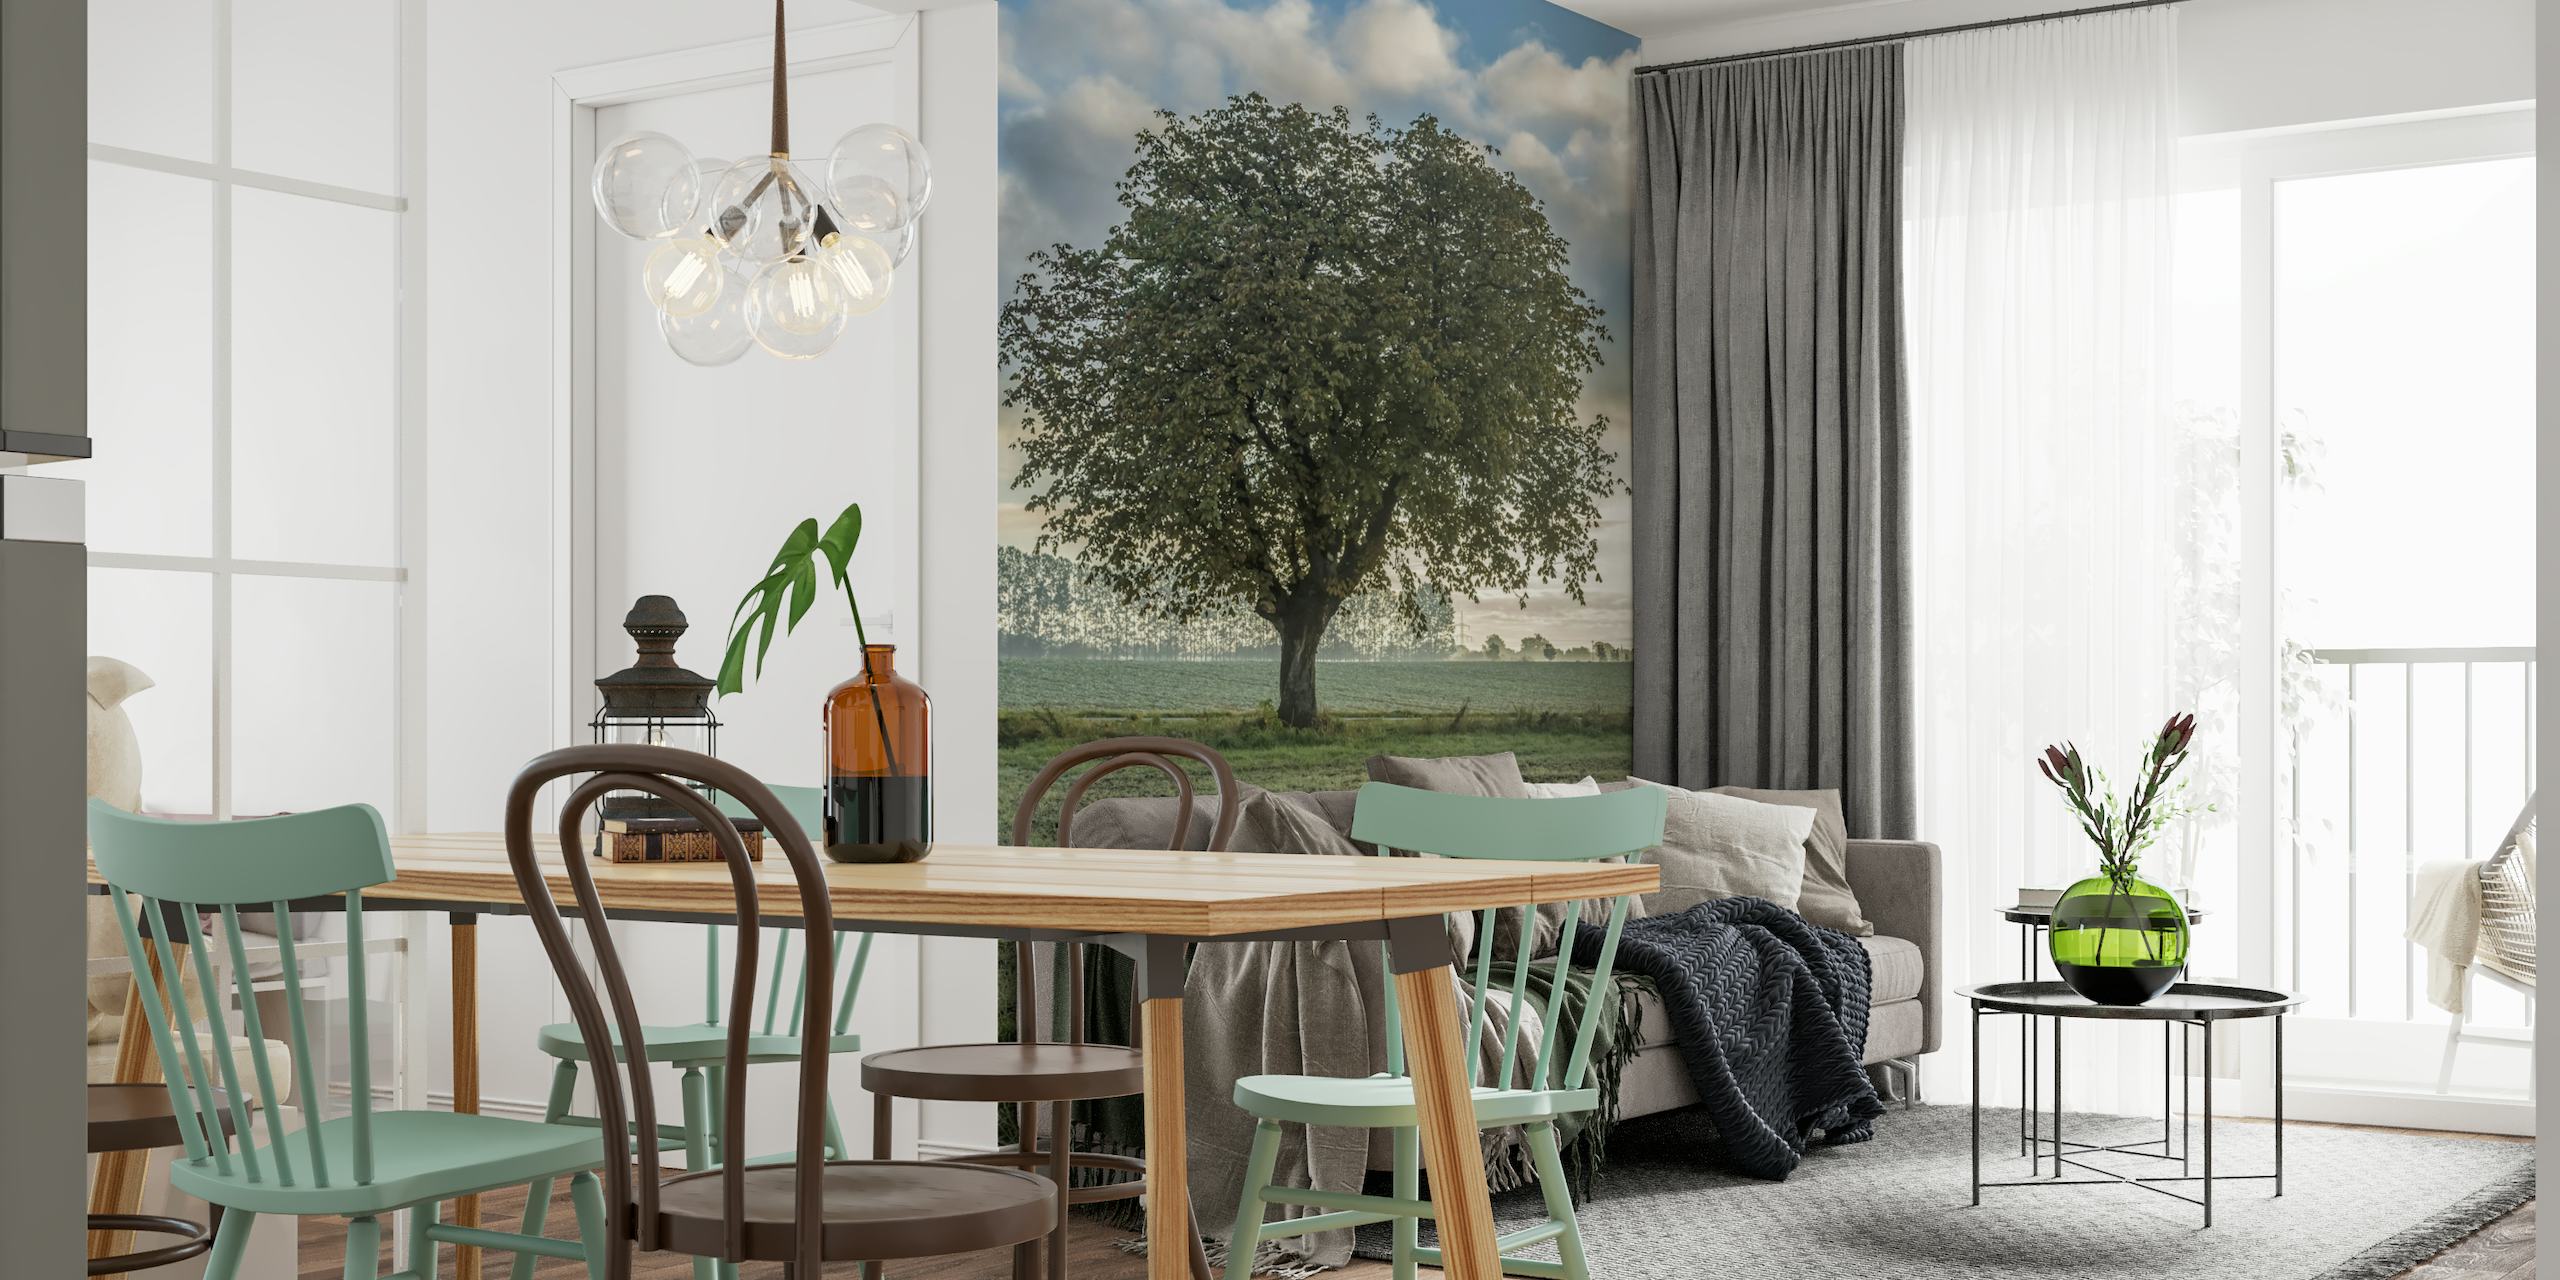 Rural Old Tree In Germany wall mural showcasing a solitary tree in a field